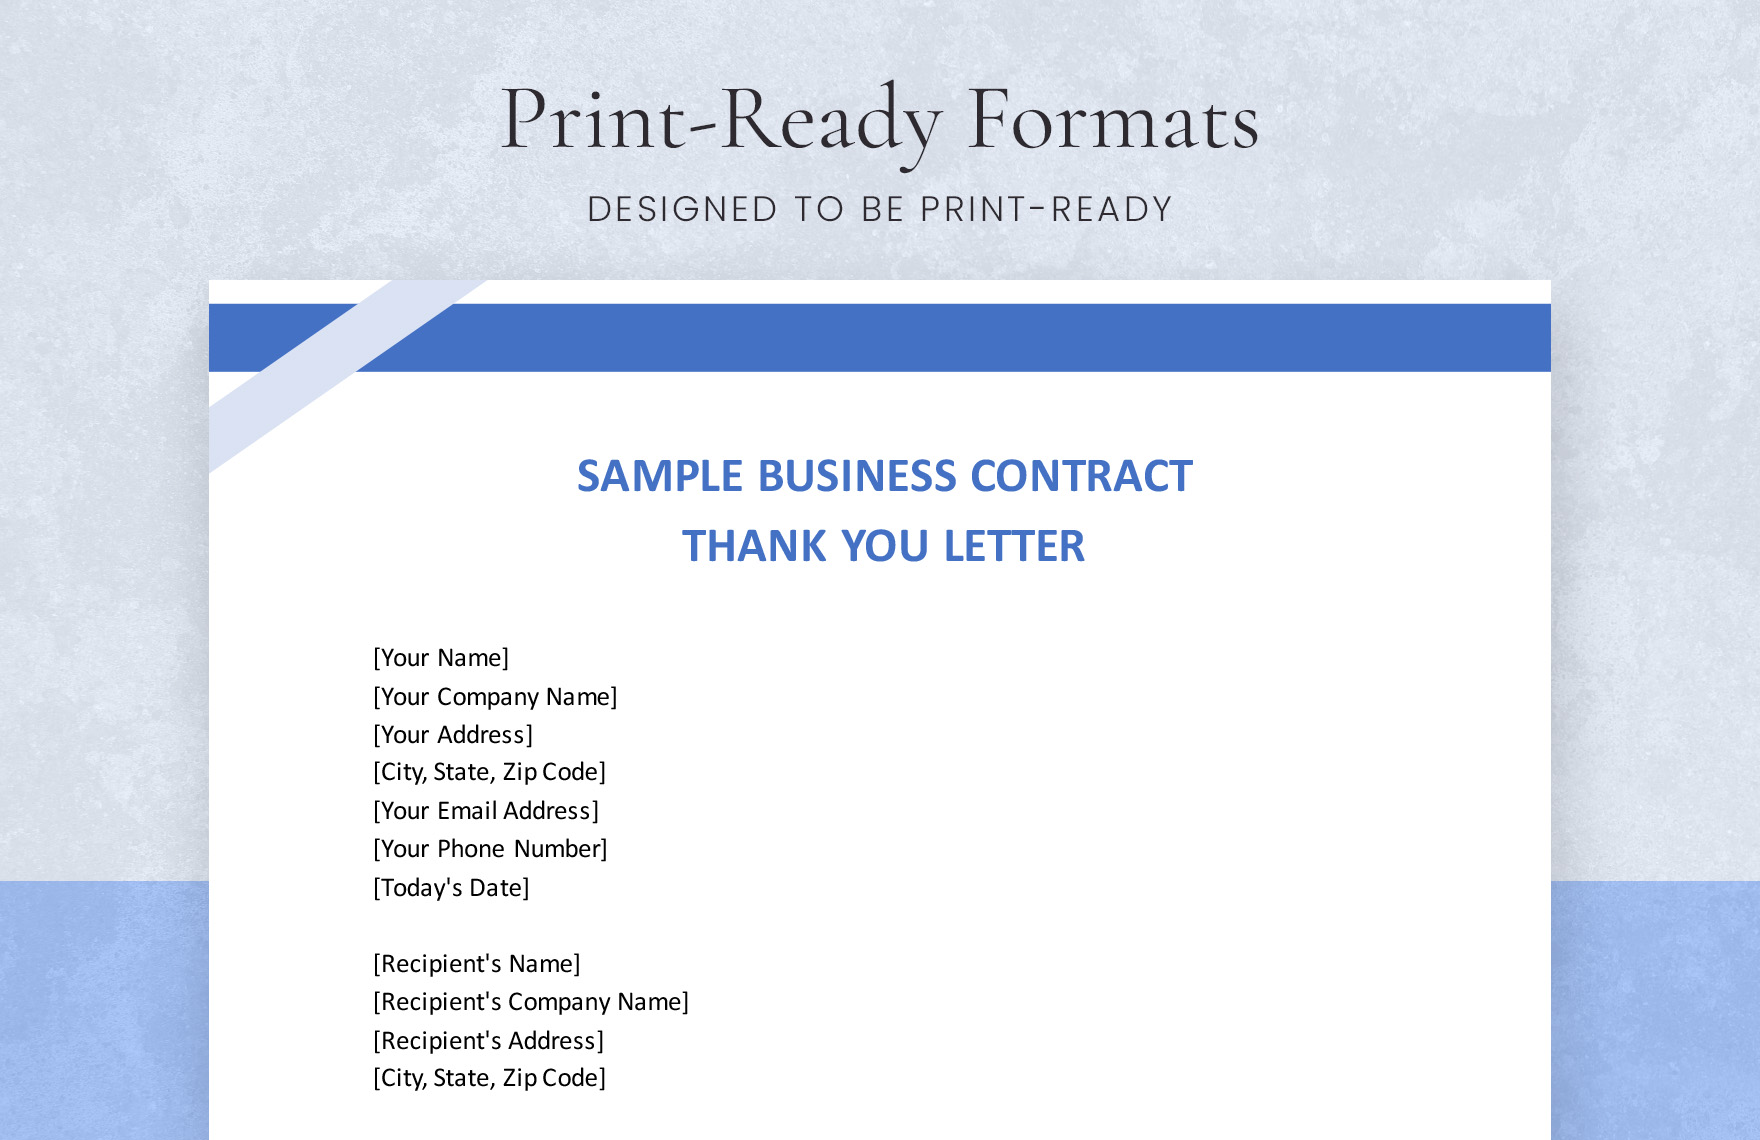 Sample Business Contract Thank You Letter Template